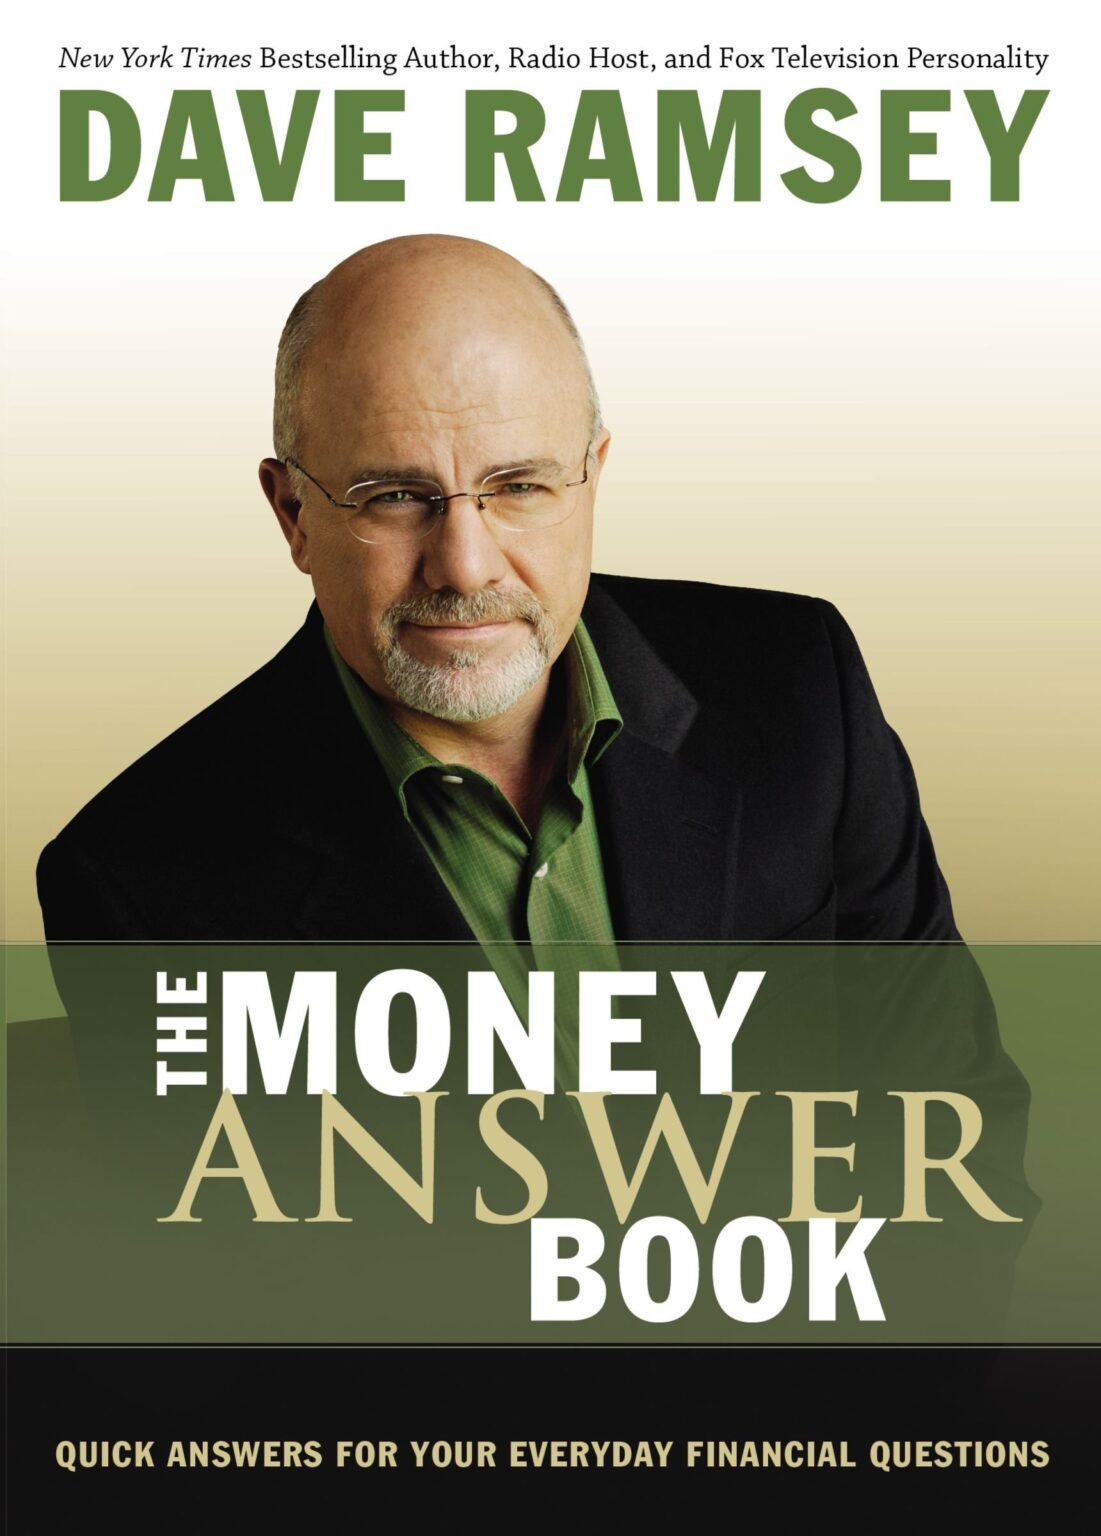 dave ramsey tours